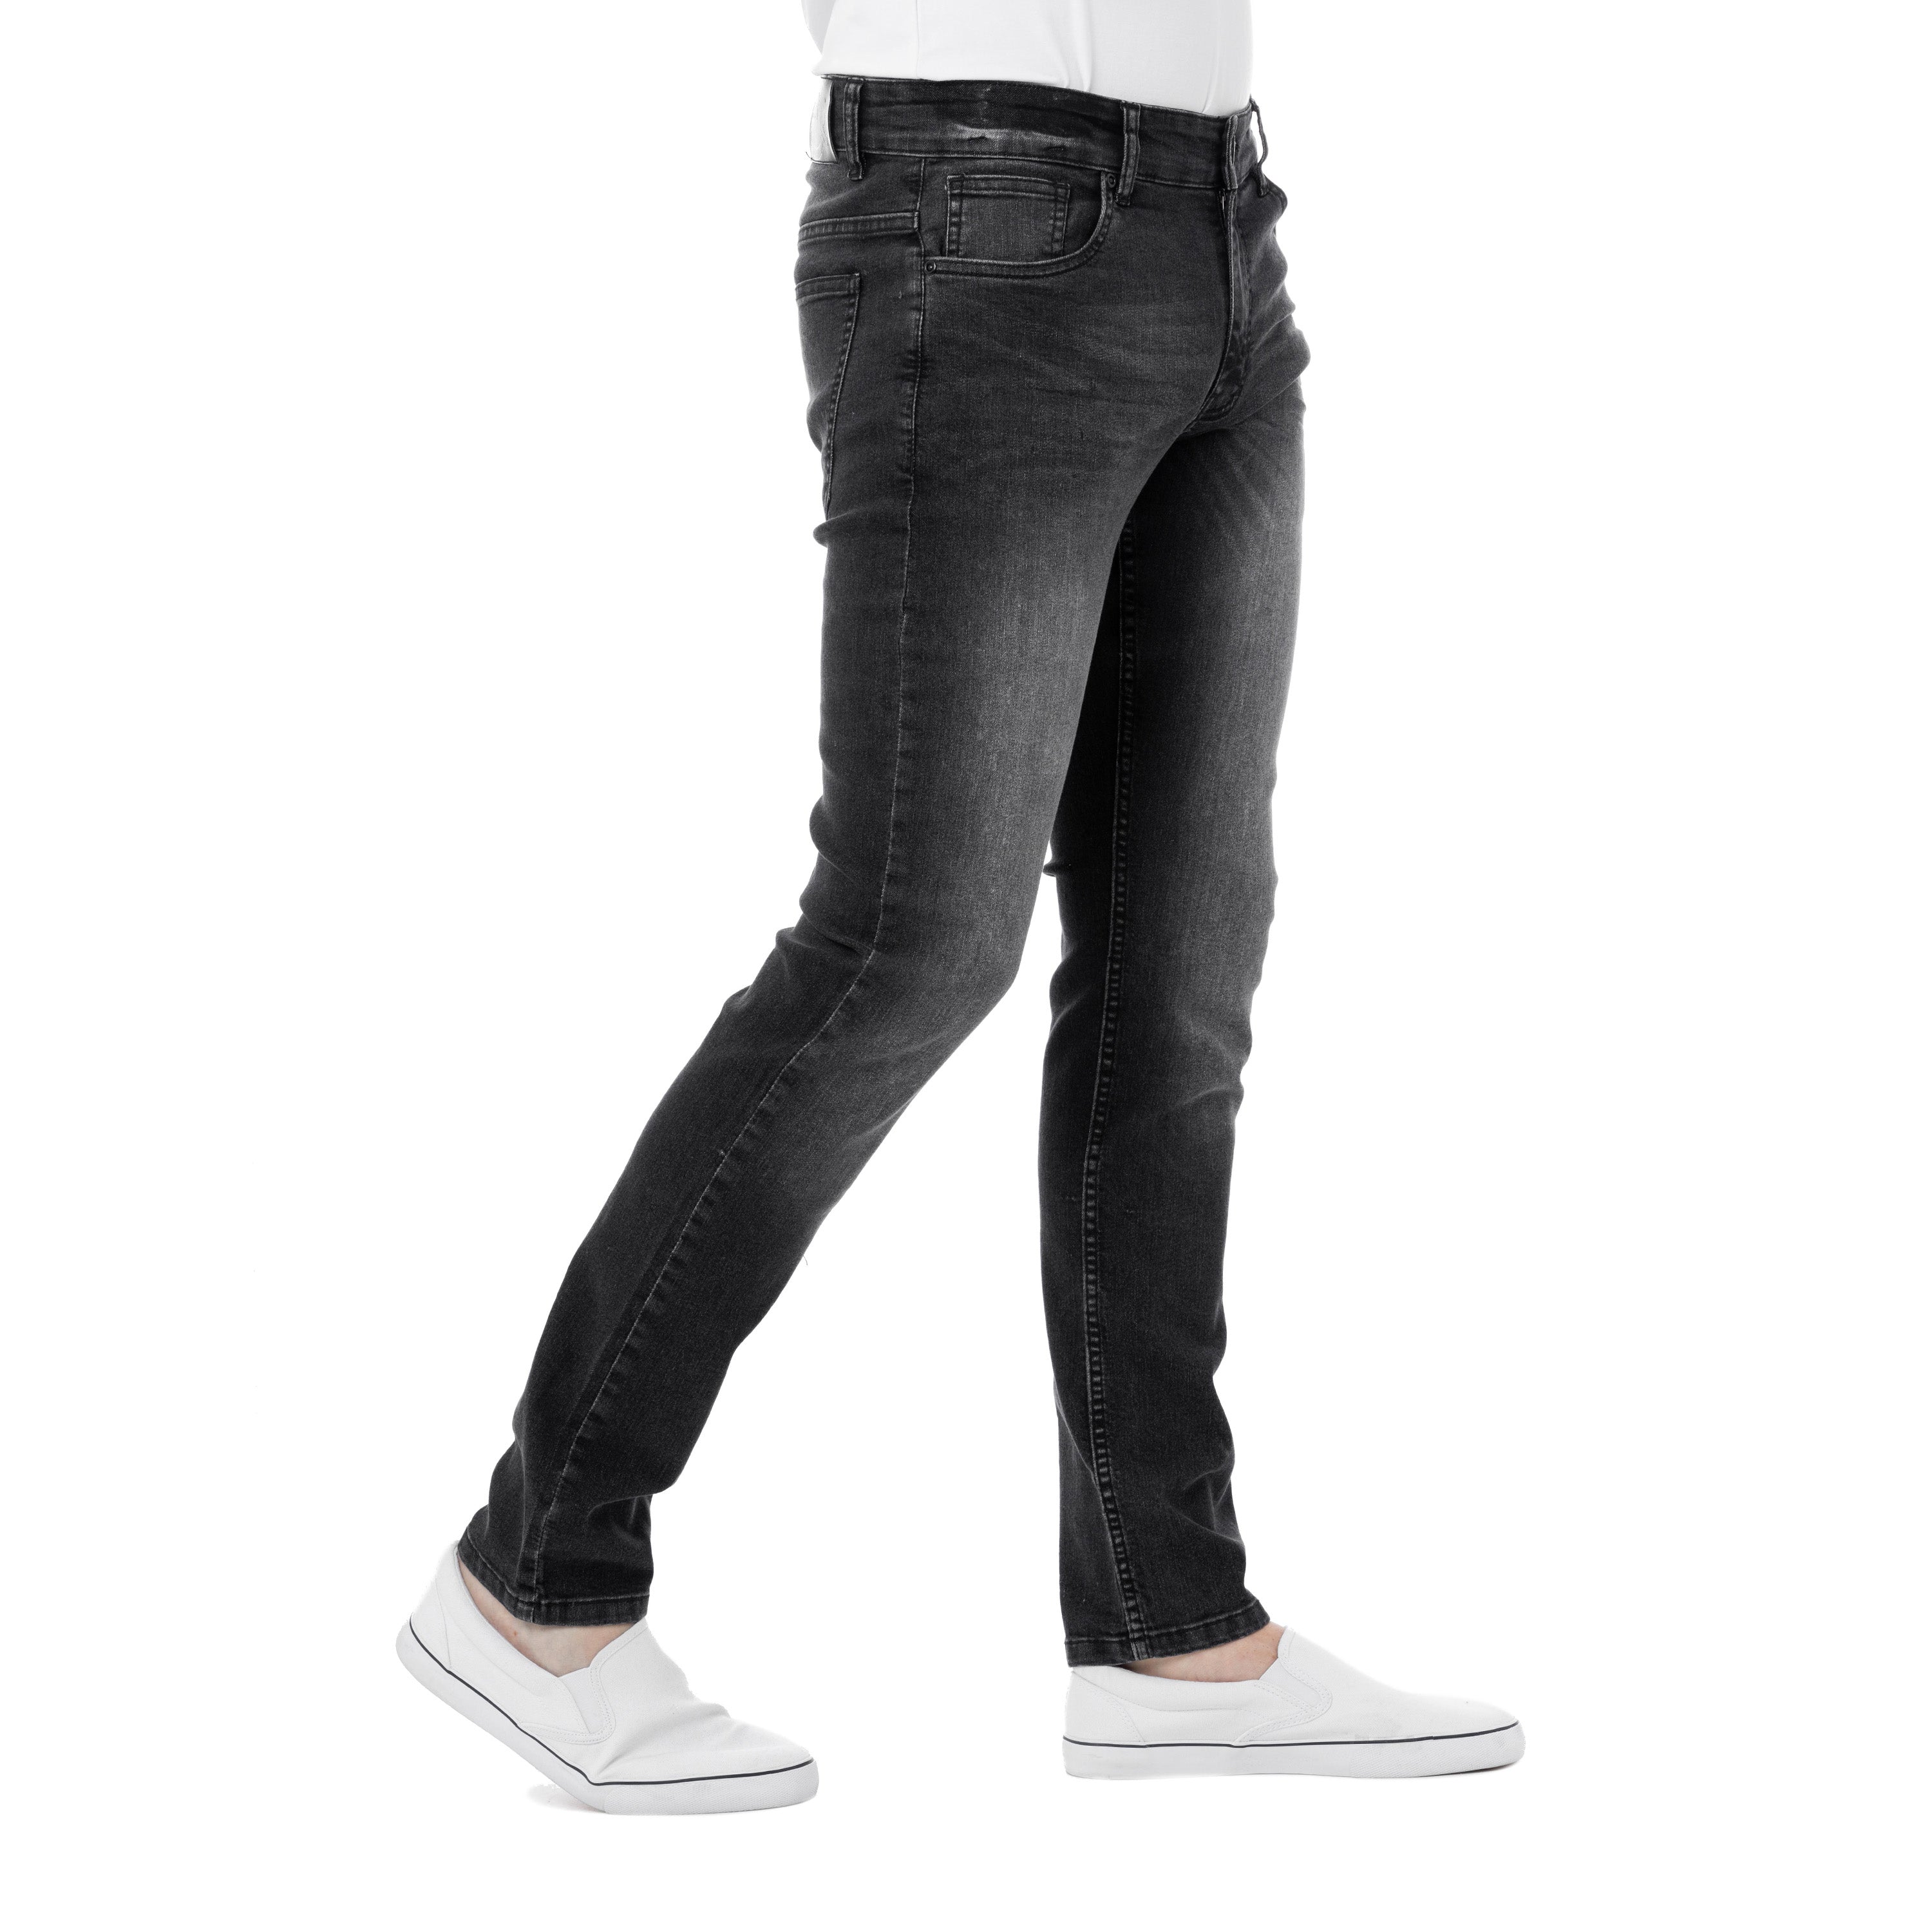 Dylan Slim Fit Jeans Dark Smoke For Tall Men | American Tall